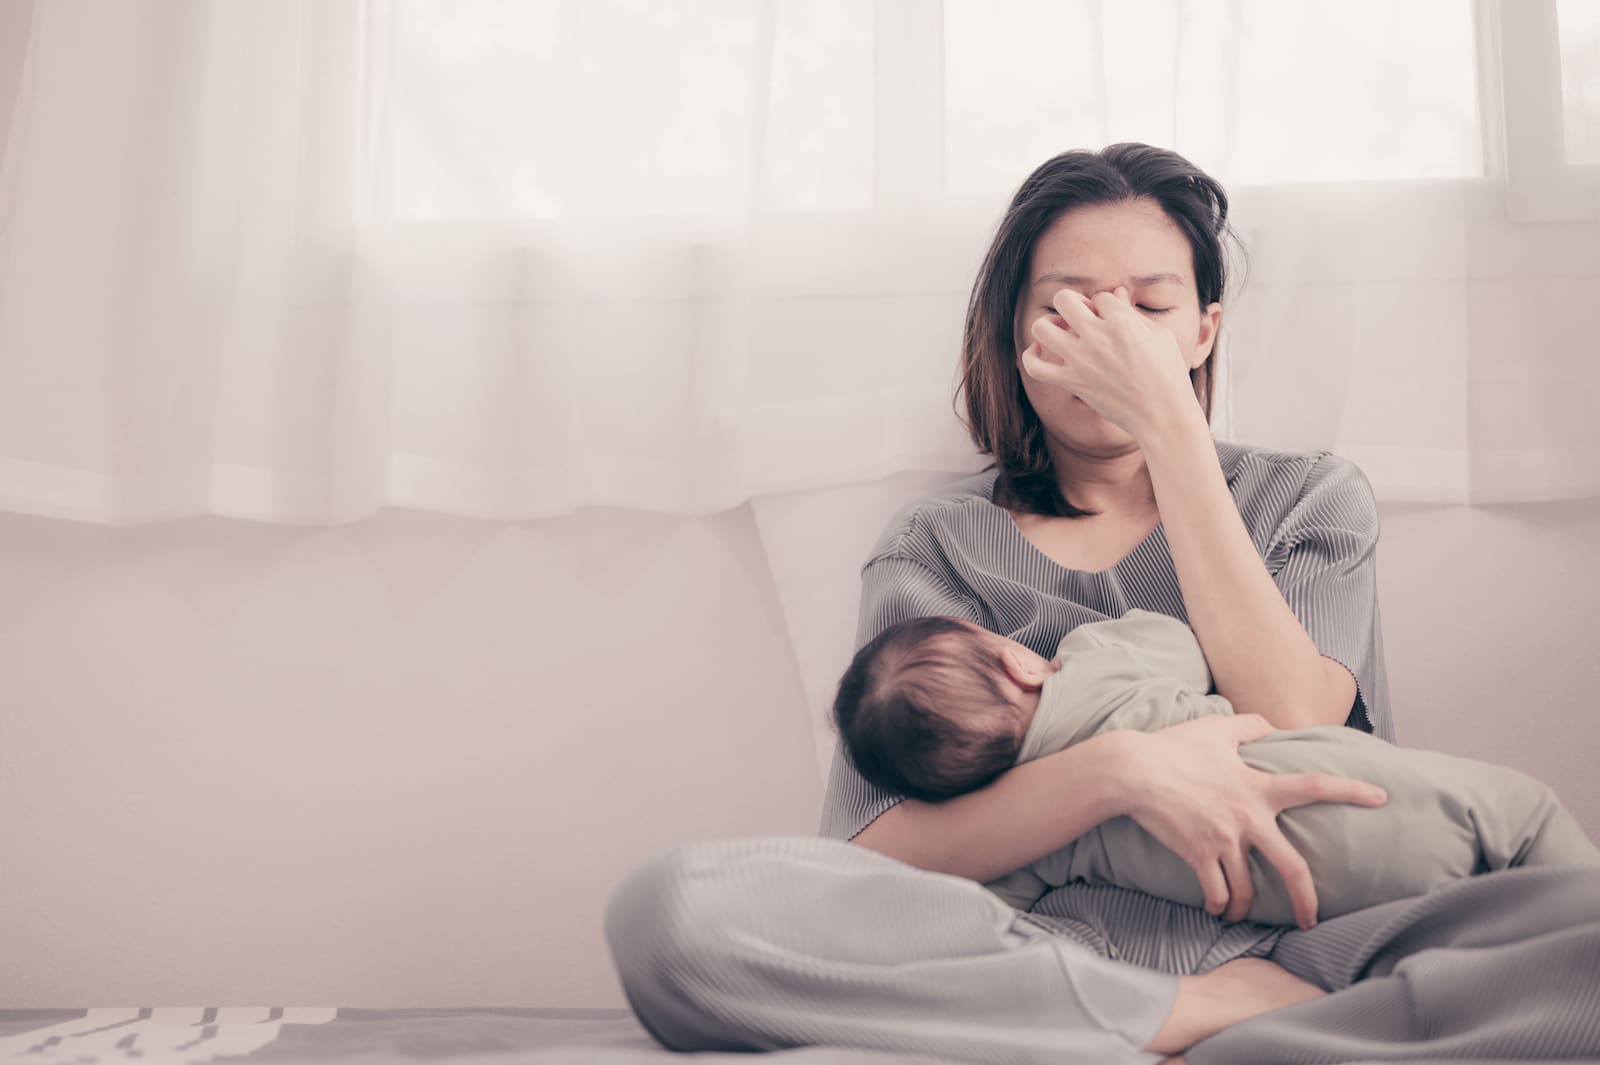 Postpartum Insomnia: Symptoms, Causes, What to Do About It